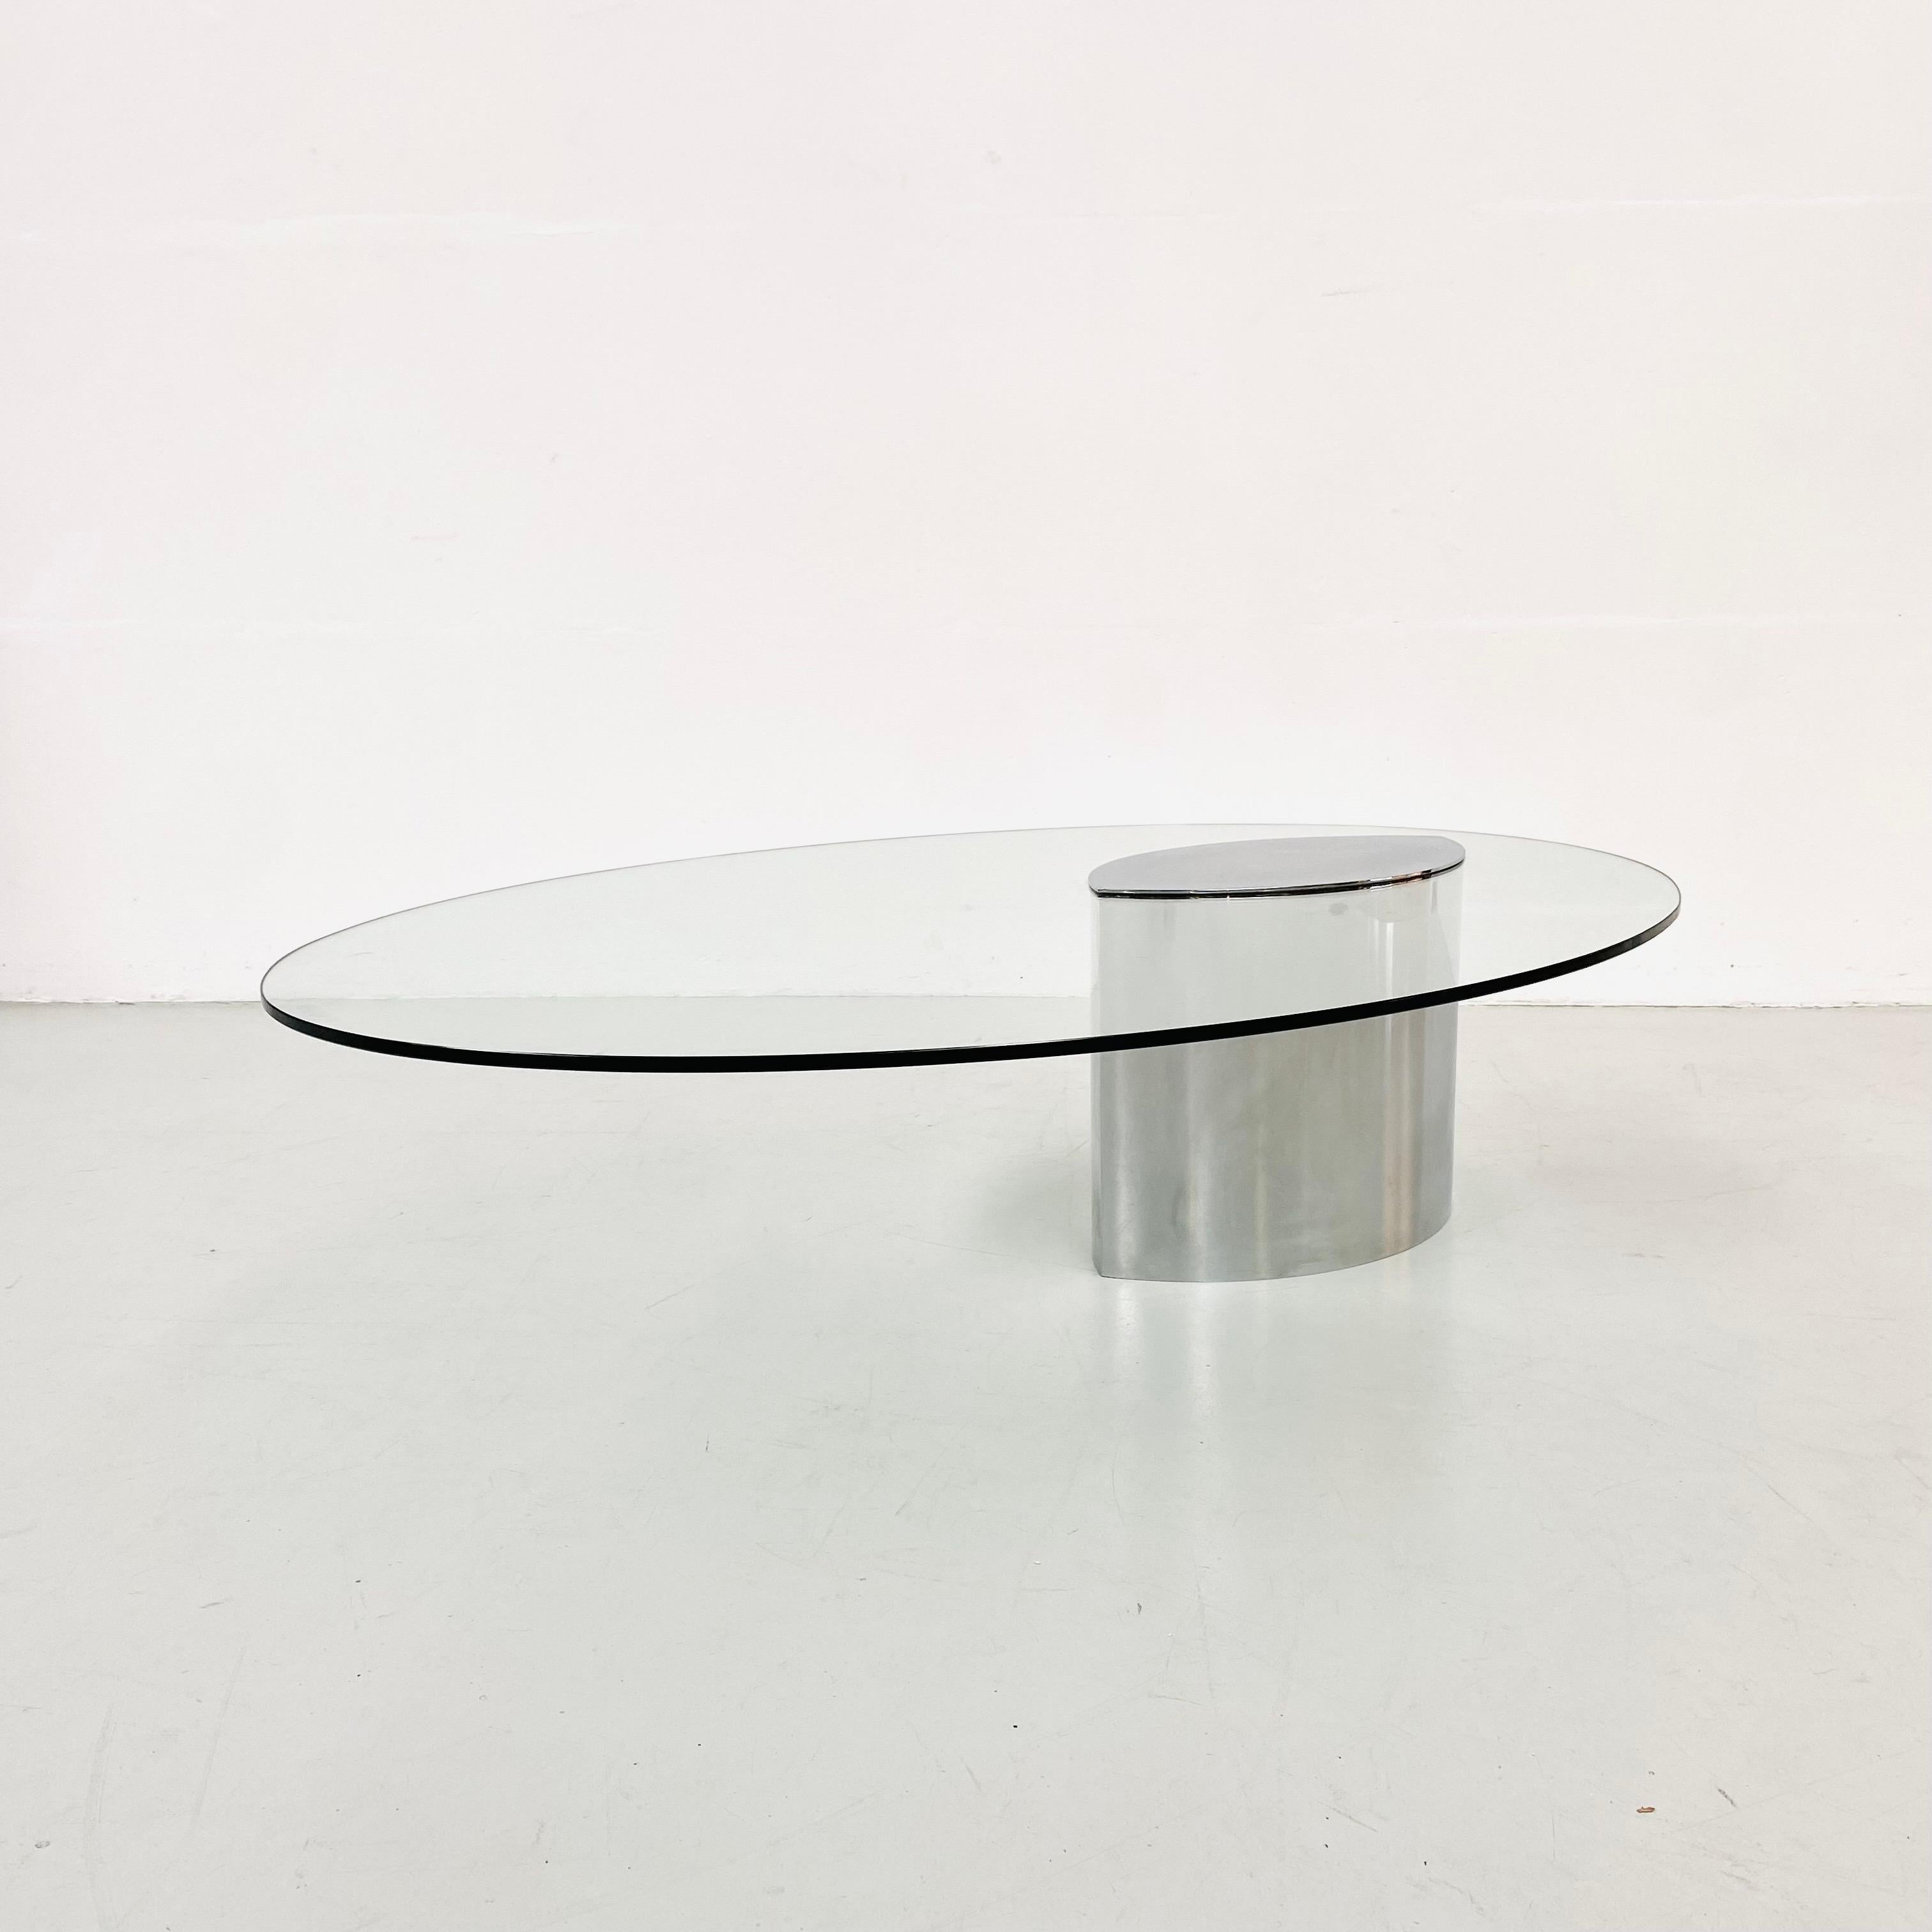 This mid-century oval glass and steel coffee table was designed by Maria Cristina Mariani 